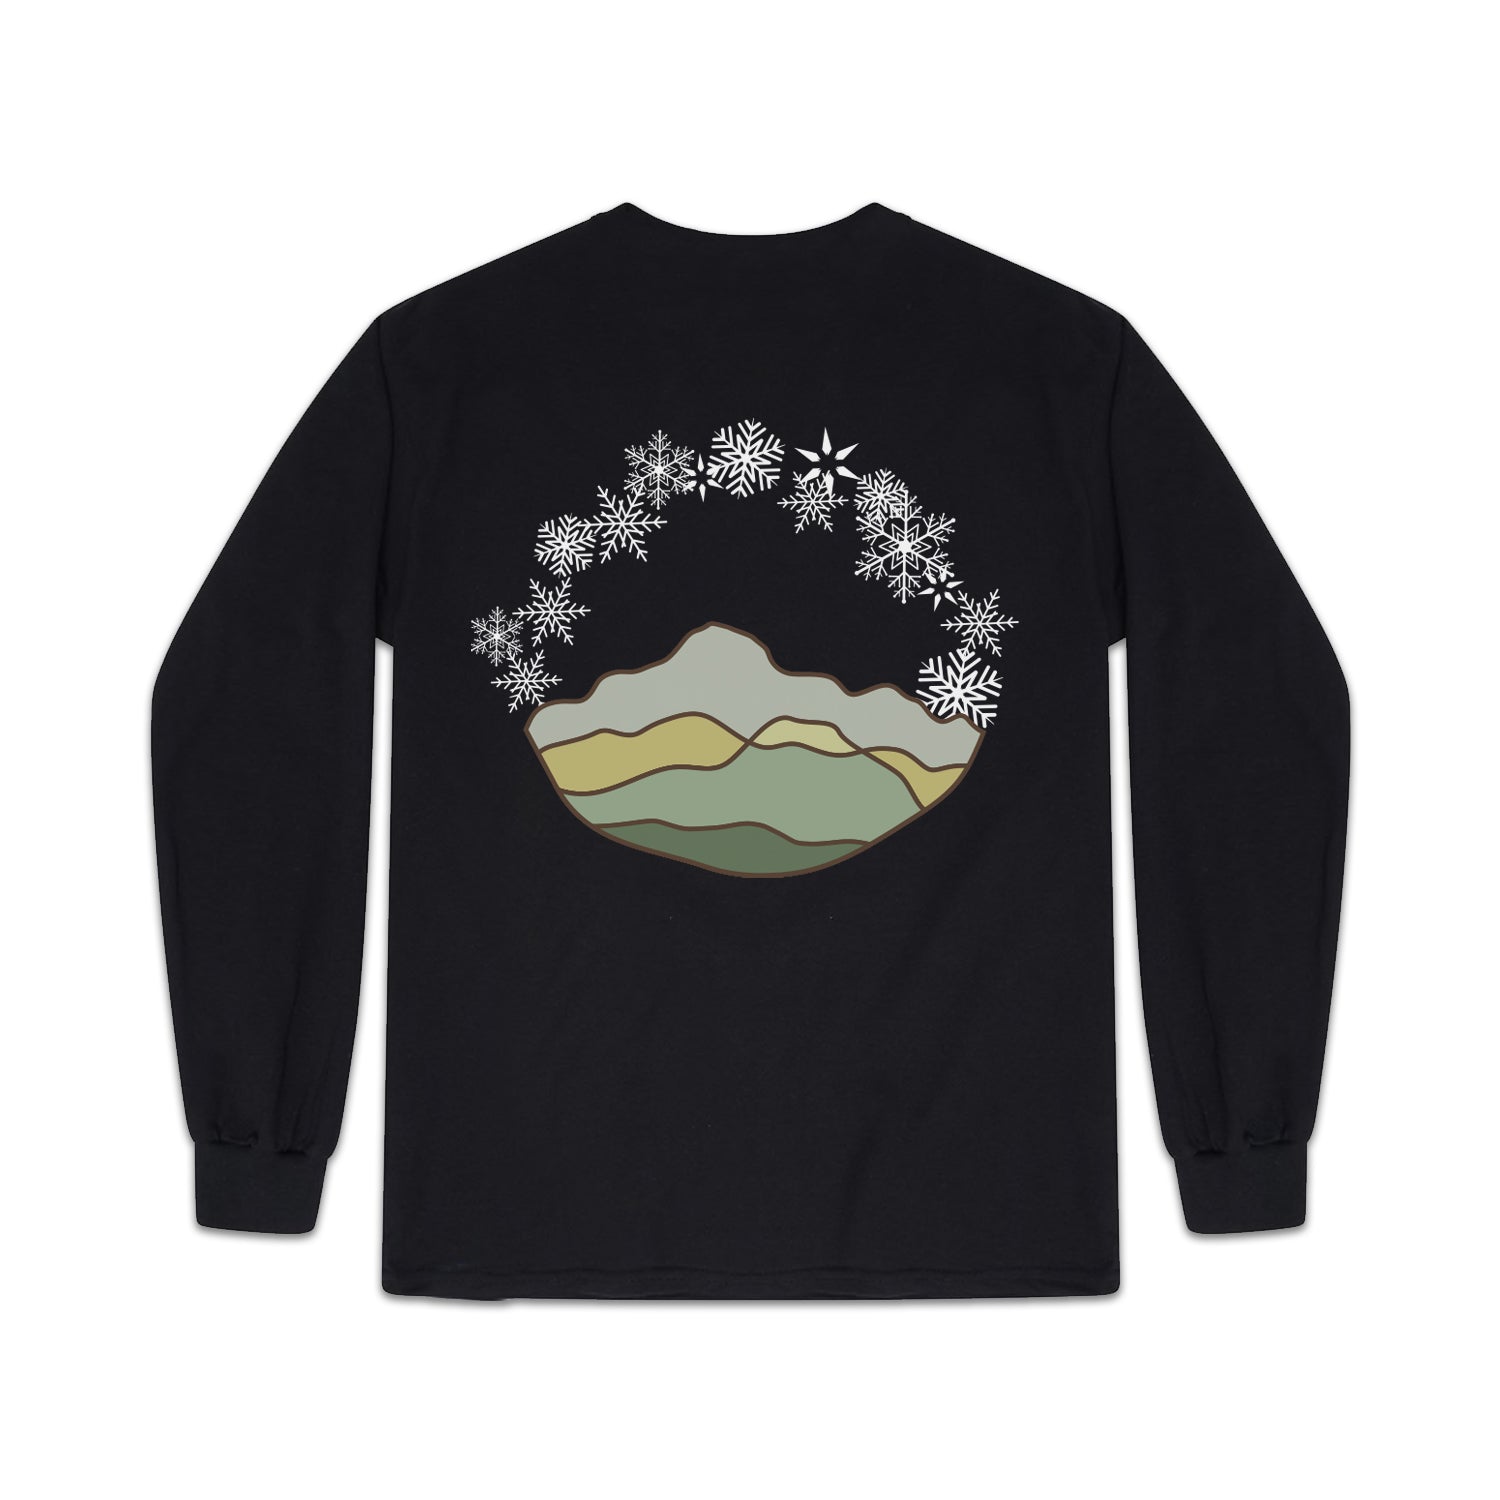 Of These Mountains Snowflakes Long Sleeve Graphic Tee